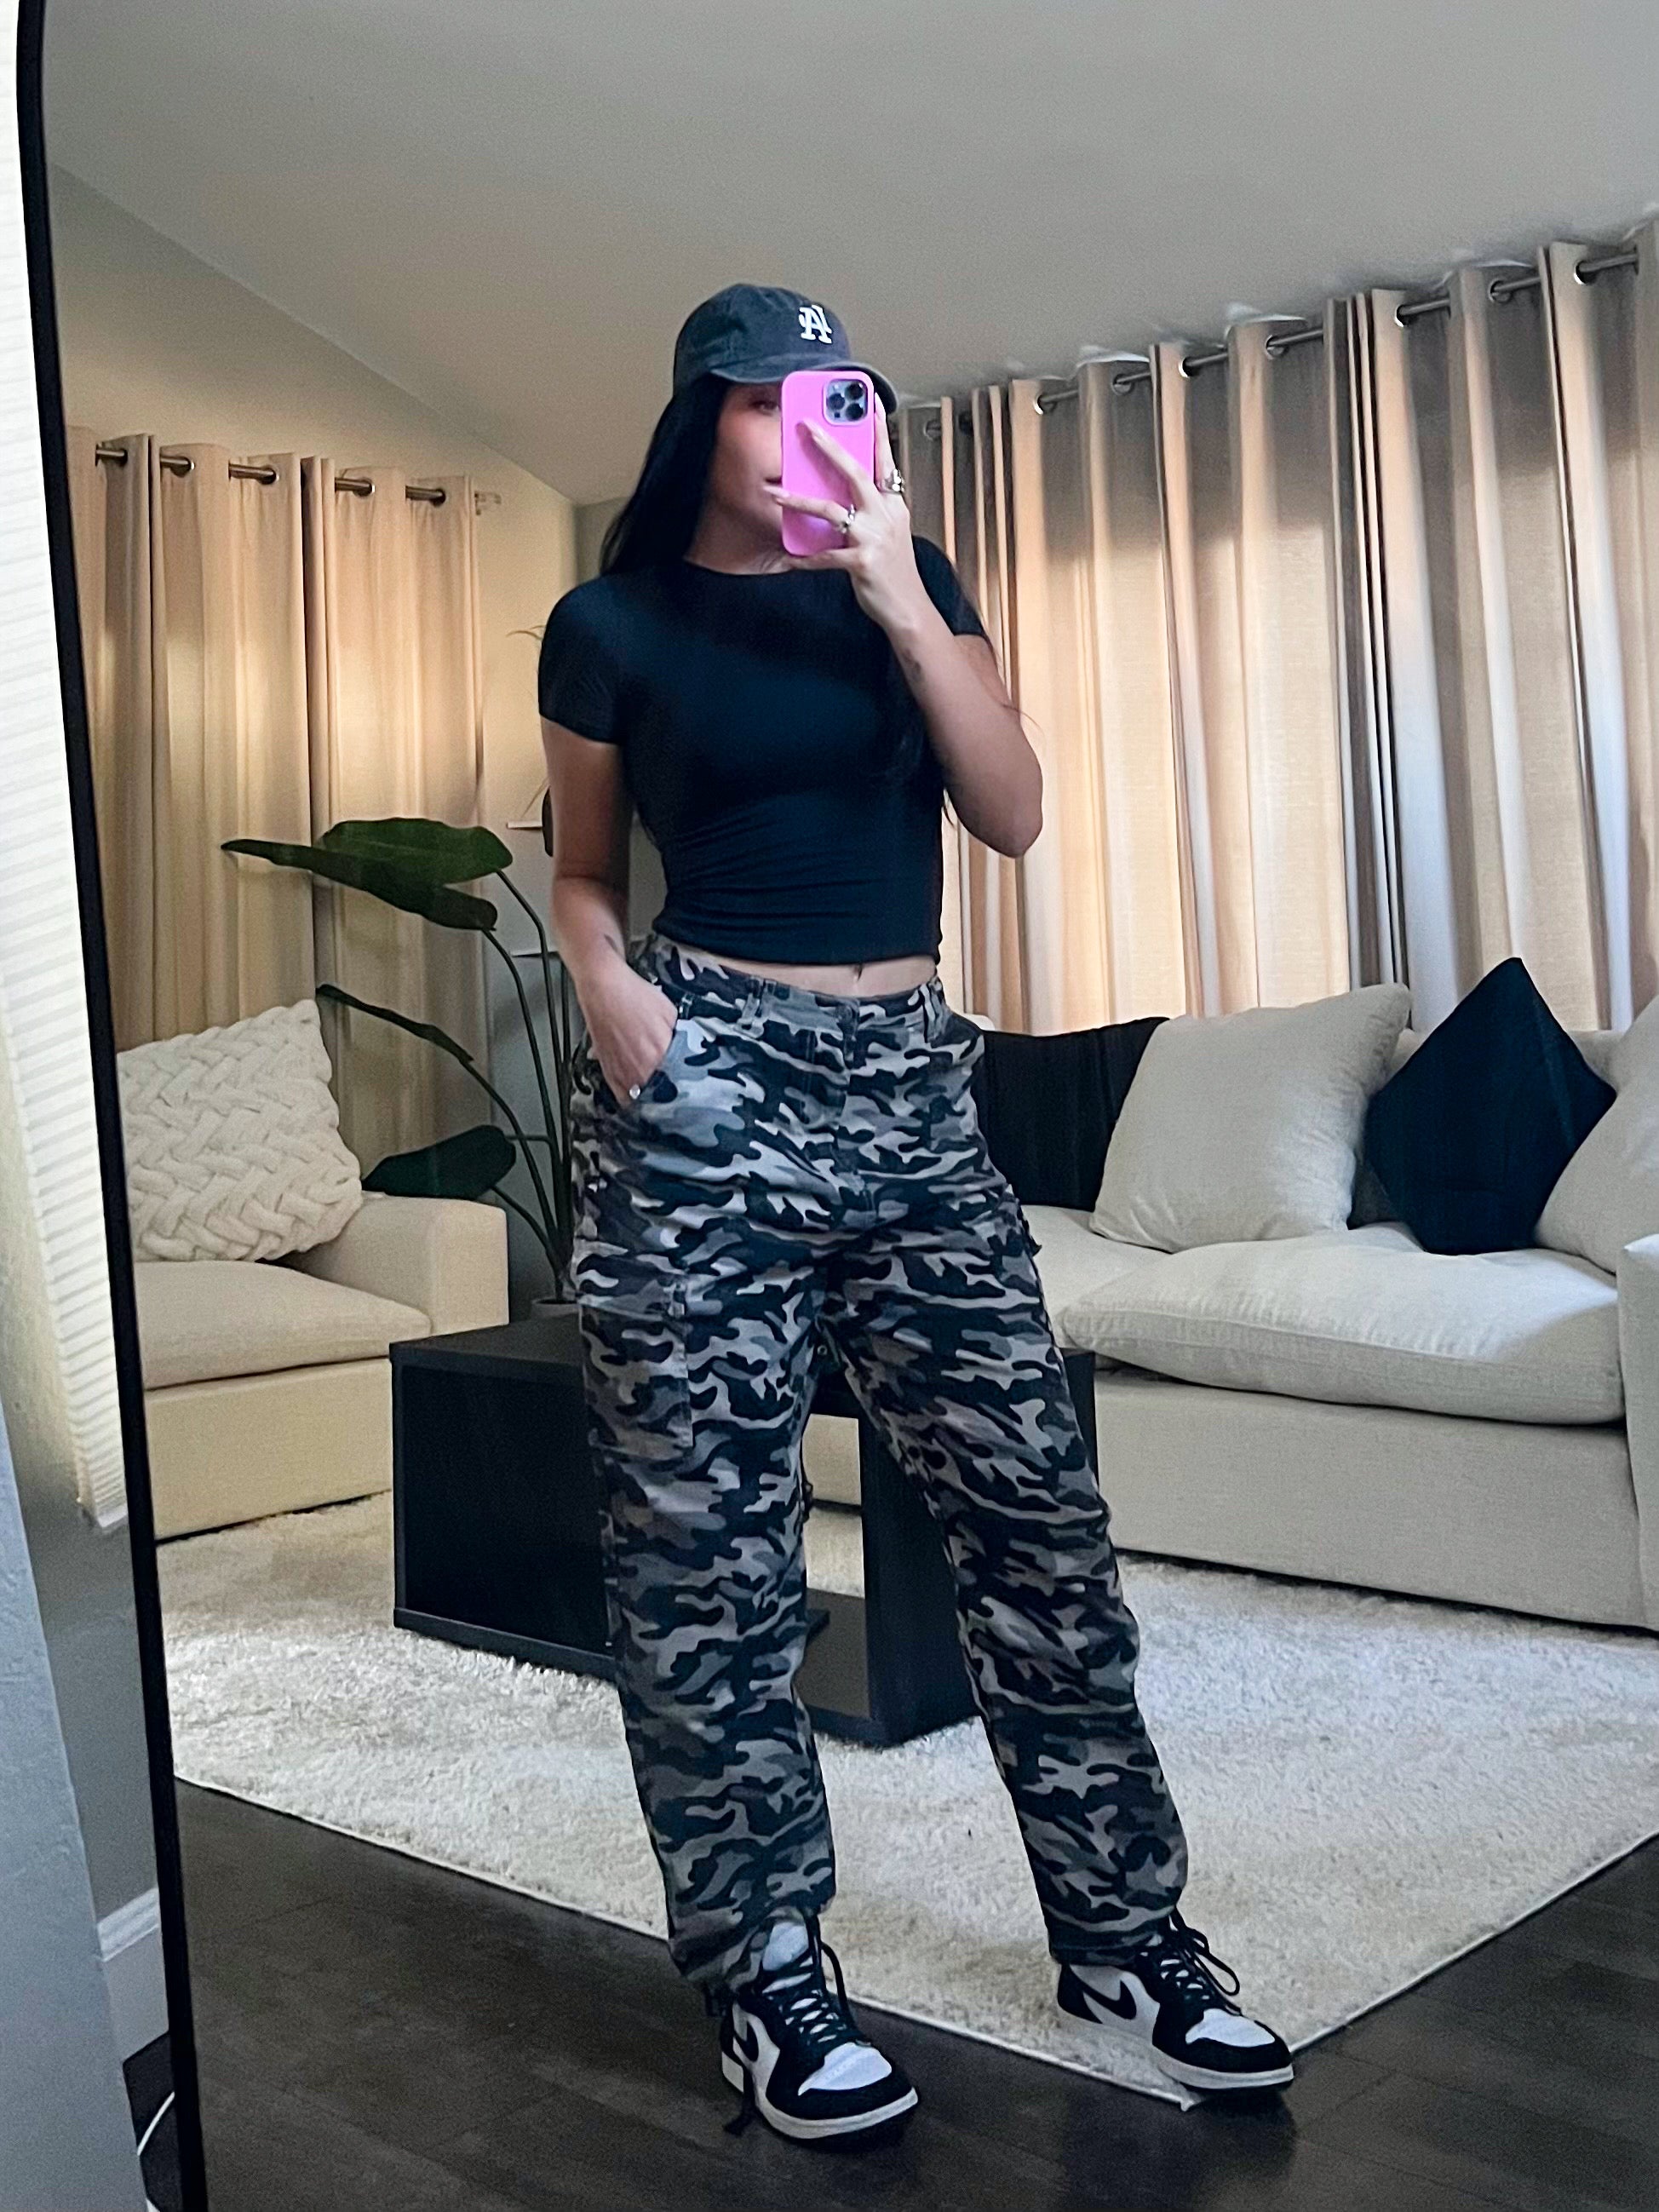 High waist drop crotch style joggers/pants doesn't need to be camo but I'd  like this exact style : r/findfashion